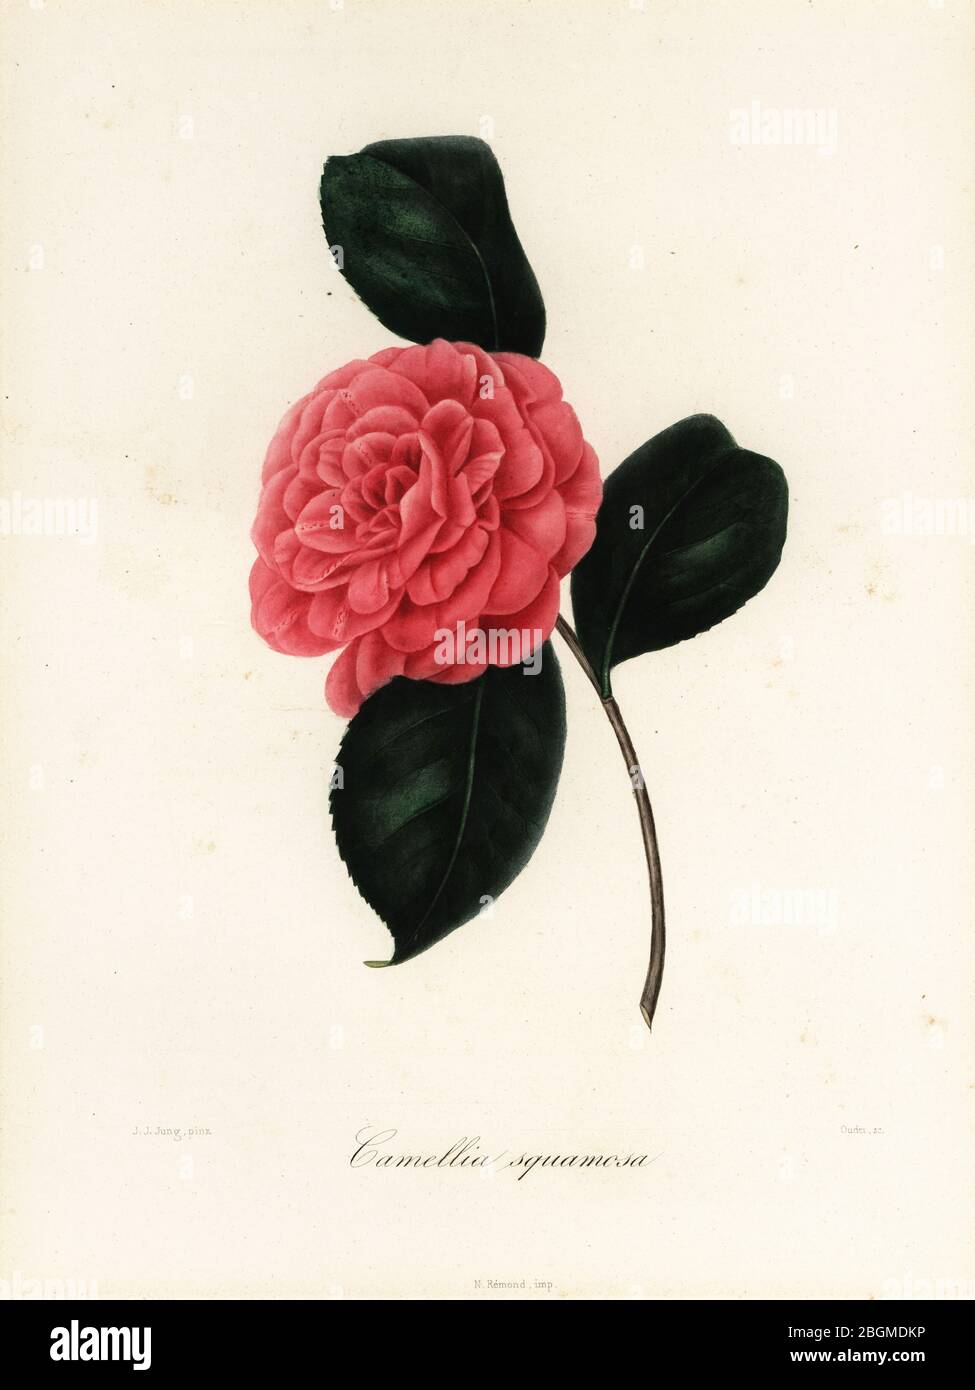 Camellia japonica variety, Camellia squamosa or Camellia squammosa. Produced by Dr. Sacco of Milan in 1838. Handcoloured copperplate stipple engraving by Oudet after a botanical illustration by Johann Jakob Jung from Lorenzo Berlese’s Iconographie du Genre Camellia, ou description et figures des camellia les plus beaux et les plus rares, Paris, 1841. Stock Photo